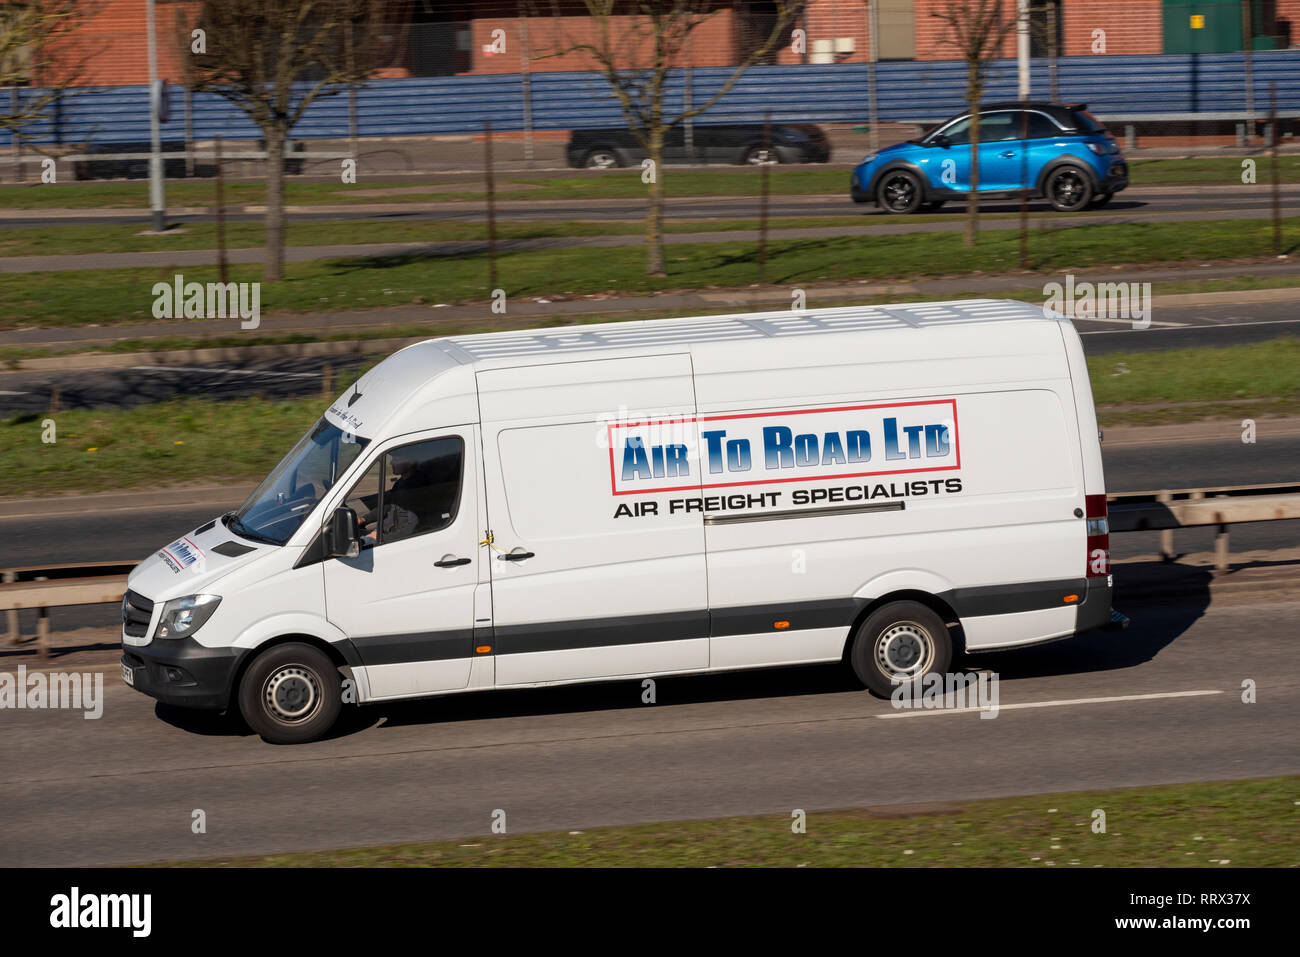 Air to Road Ltd air freight specialists. White van, commercial transport business. Driving on the road. Transportation. Space for copy Stock Photo